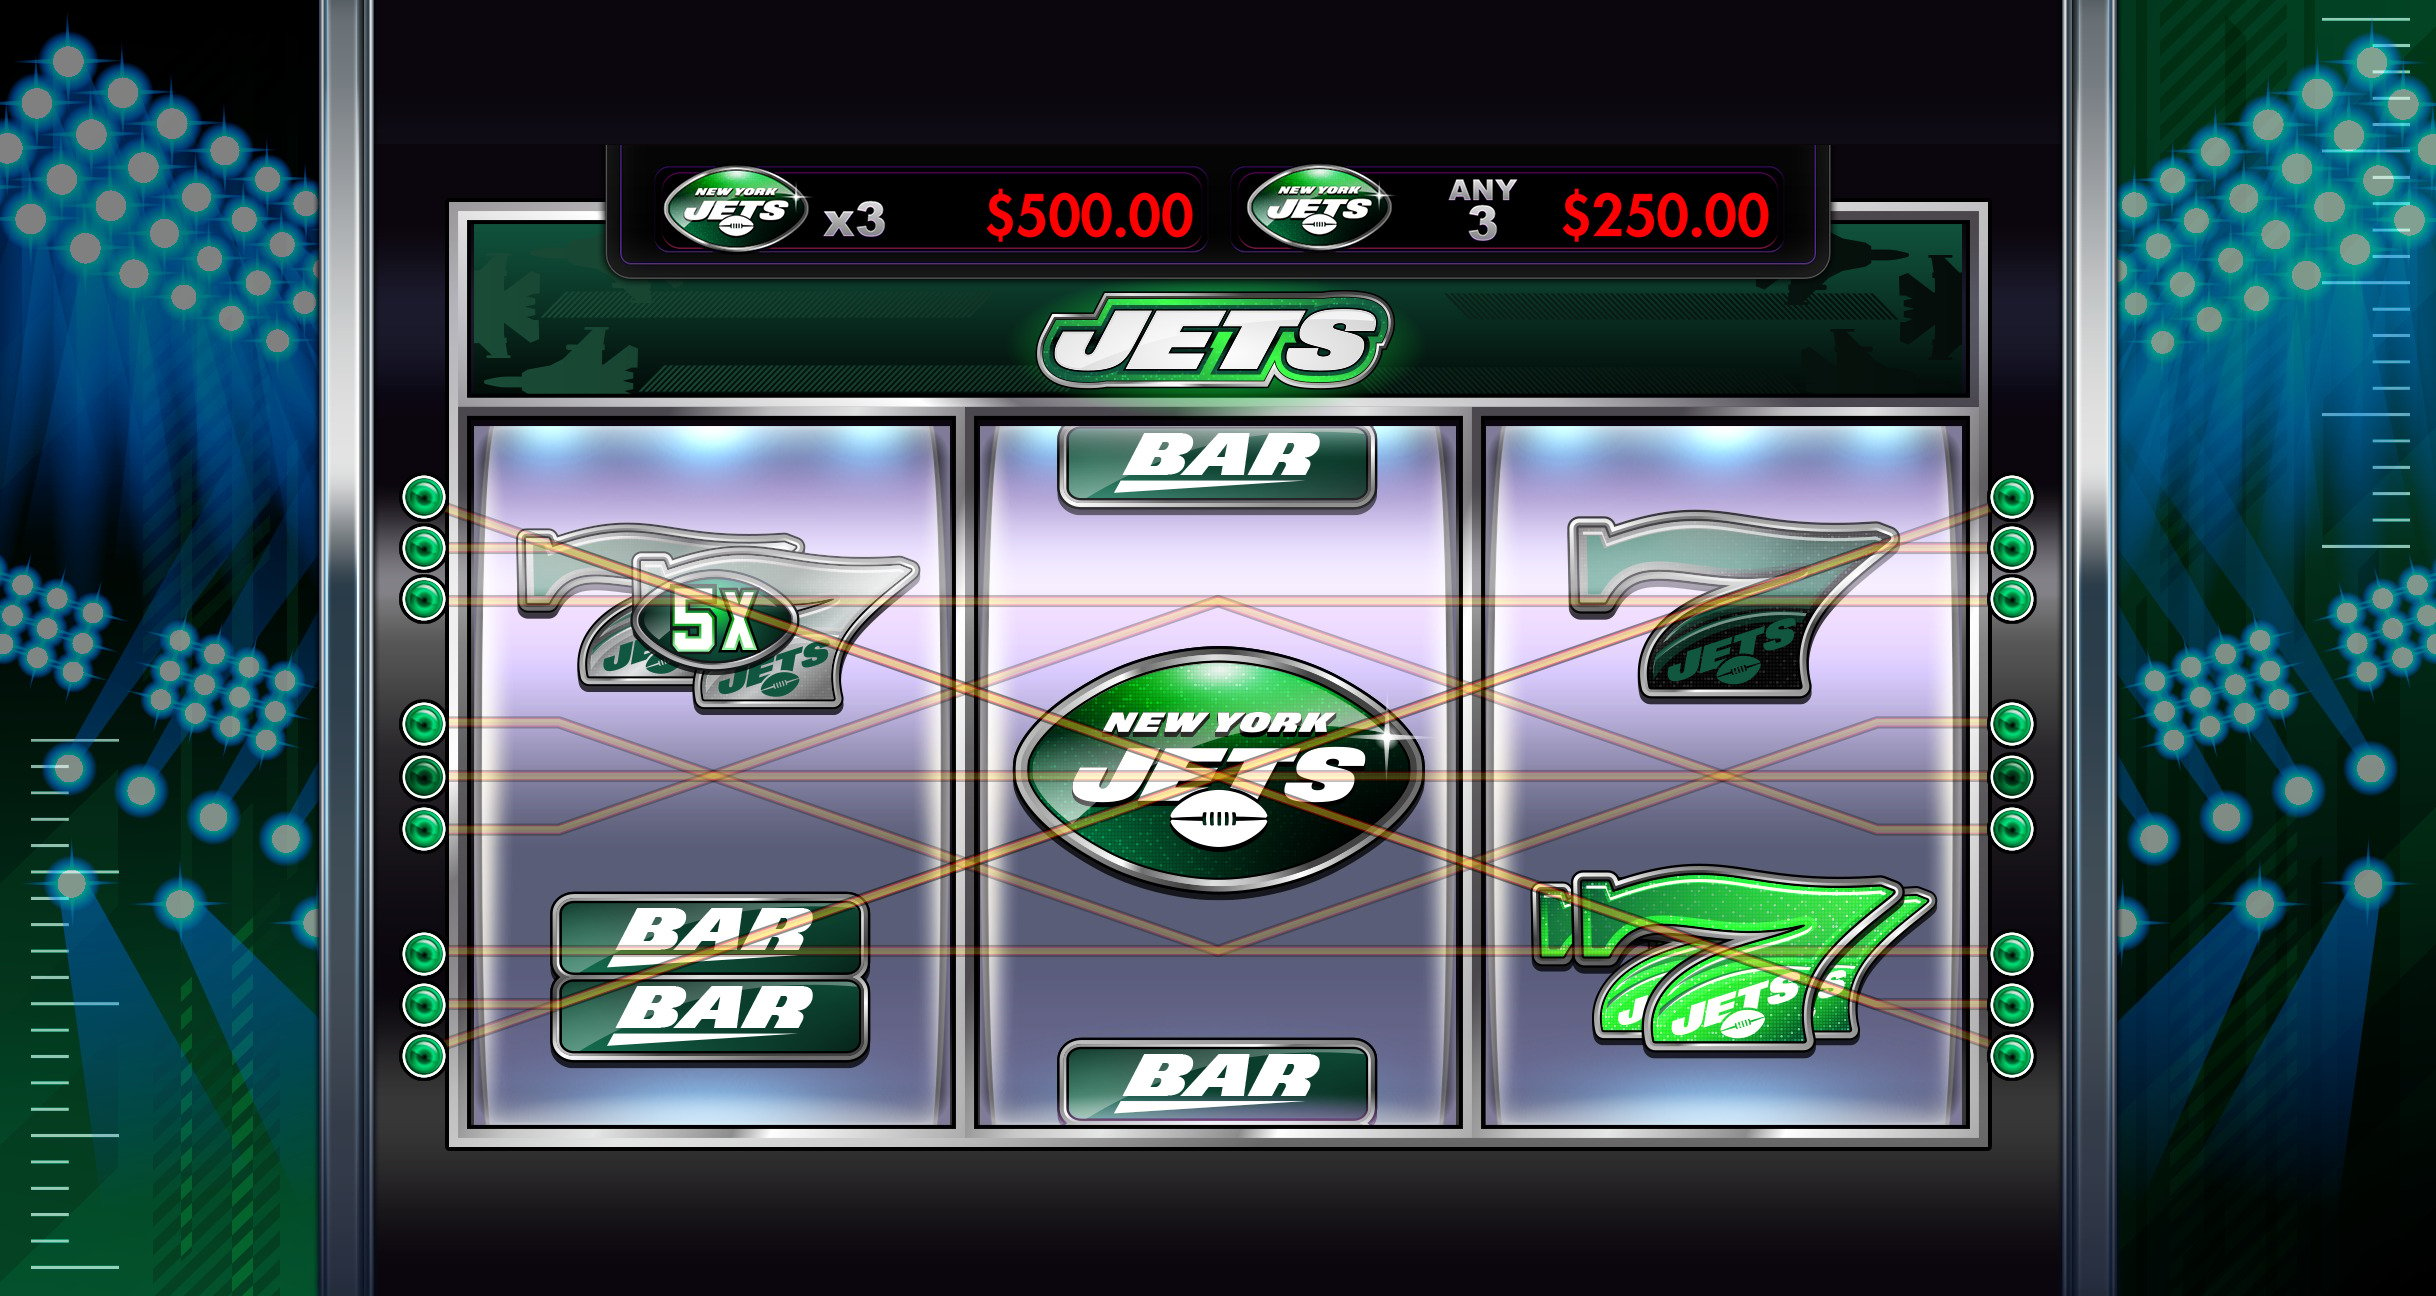 BetMGM Launches Jets Deluxe Slot in New Jersey